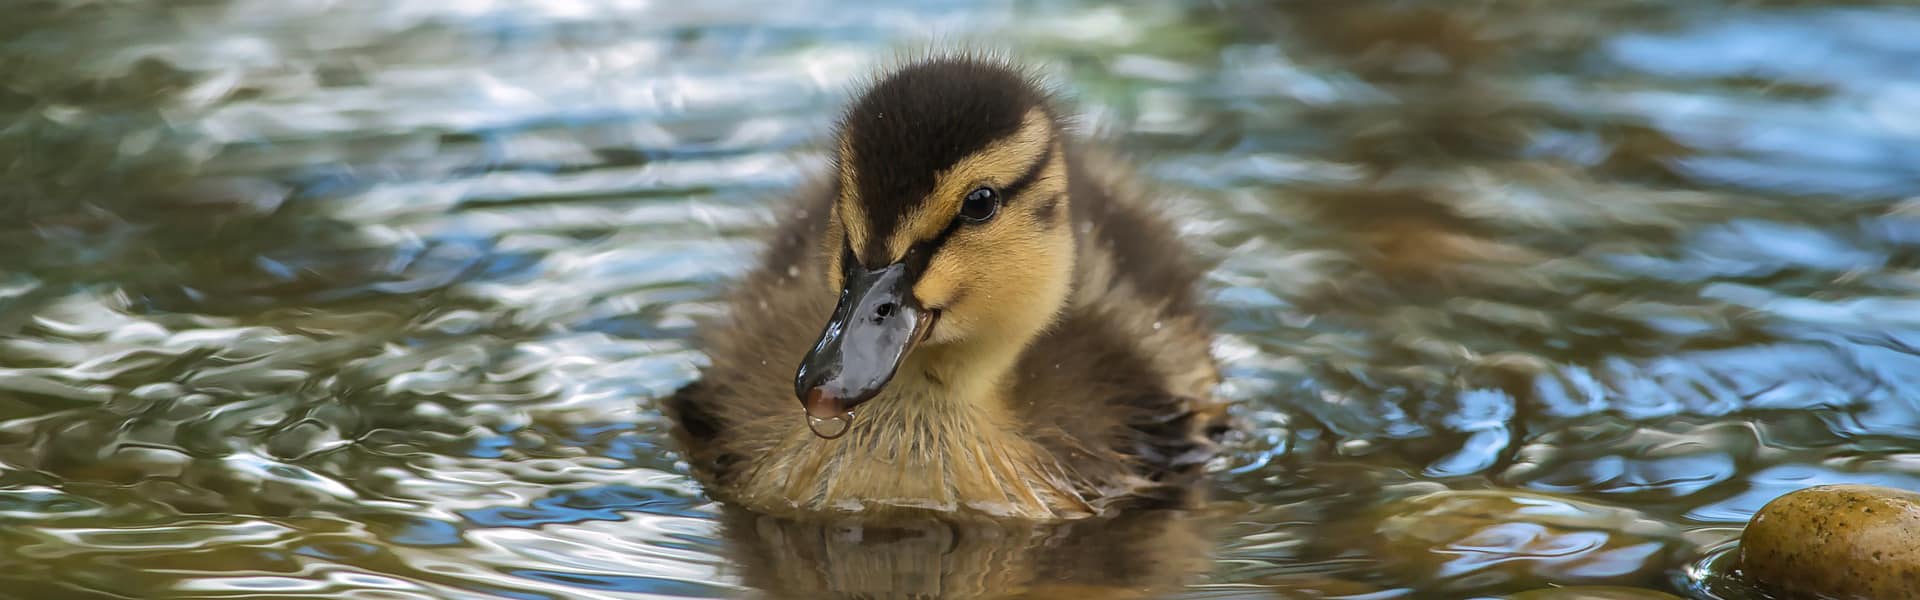 A duckling on water